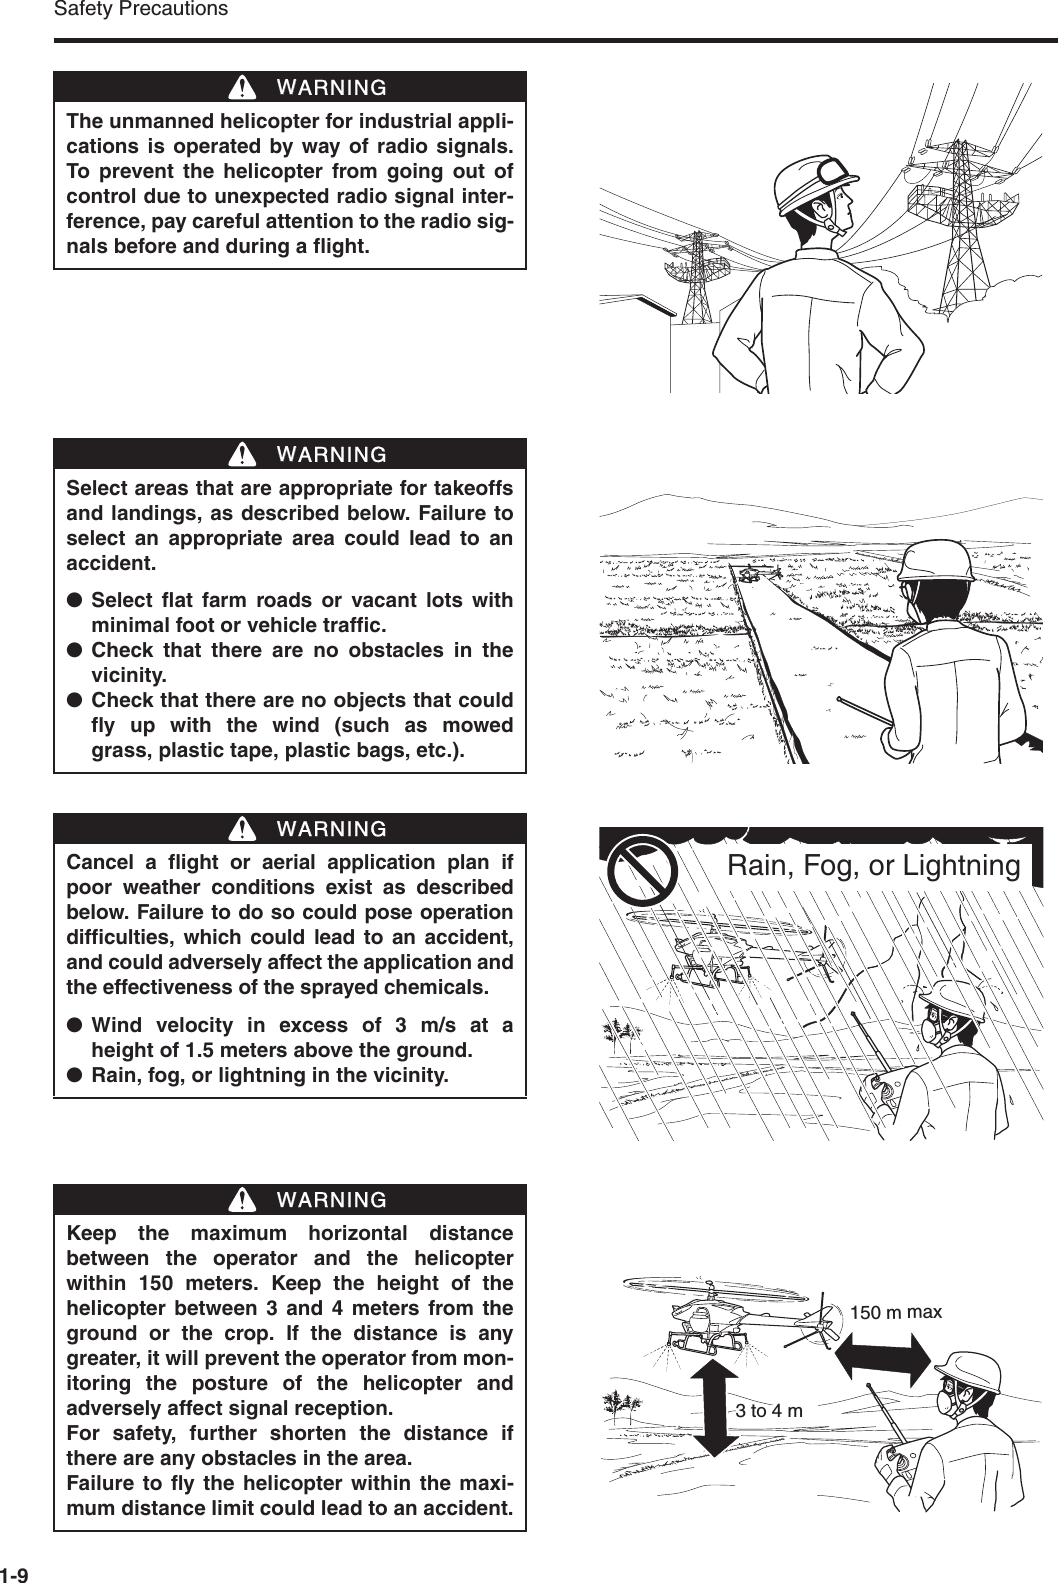 Safety Precautions1-9The unmanned helicopter for industrial appli-cations is operated by way of radio signals.To prevent the helicopter from going out ofcontrol due to unexpected radio signal inter-ference, pay careful attention to the radio sig-nals before and during a flight.WWARNINGSelect areas that are appropriate for takeoffsand landings, as described below. Failure toselect an appropriate area could lead to anaccident.●Select flat farm roads or vacant lots withminimal foot or vehicle traffic.●Check that there are no obstacles in thevicinity.●Check that there are no objects that couldfly up with the wind (such as mowedgrass, plastic tape, plastic bags, etc.).WWARNINGCancel a flight or aerial application plan ifpoor weather conditions exist as describedbelow. Failure to do so could pose operationdifficulties, which could lead to an accident,and could adversely affect the application andthe effectiveness of the sprayed chemicals.●Wind velocity in excess of 3 m/s at aheight of 1.5 meters above the ground.●Rain, fog, or lightning in the vicinity.WWARNINGRain, Fog, or LightningKeep the maximum horizontal distancebetween the operator and the helicopterwithin 150 meters. Keep the height of thehelicopter between 3 and 4 meters from theground or the crop. If the distance is anygreater, it will prevent the operator from mon-itoring the posture of the helicopter andadversely affect signal reception.For safety, further shorten the distance ifthere are any obstacles in the area.Failure to fly the helicopter within the maxi-mum distance limit could lead to an accident.WWARNING150 m max3 to 4 m